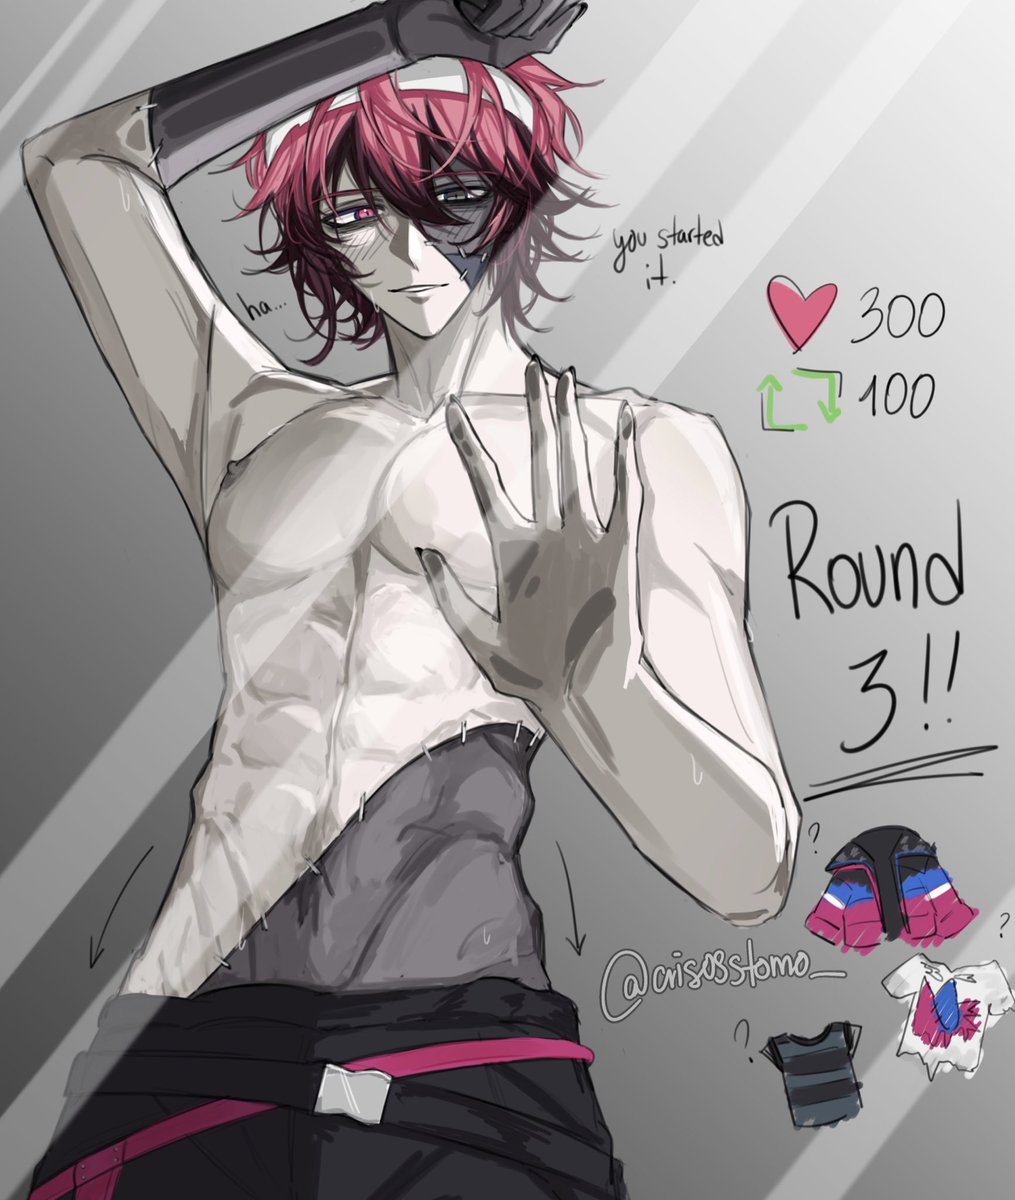 EHHHHH strip art challenge round 3!!

btw if we don’t reach the goal, it’s fine, bc i’ll have the meal for myself 🤑🤙🤙 

#RAWsco